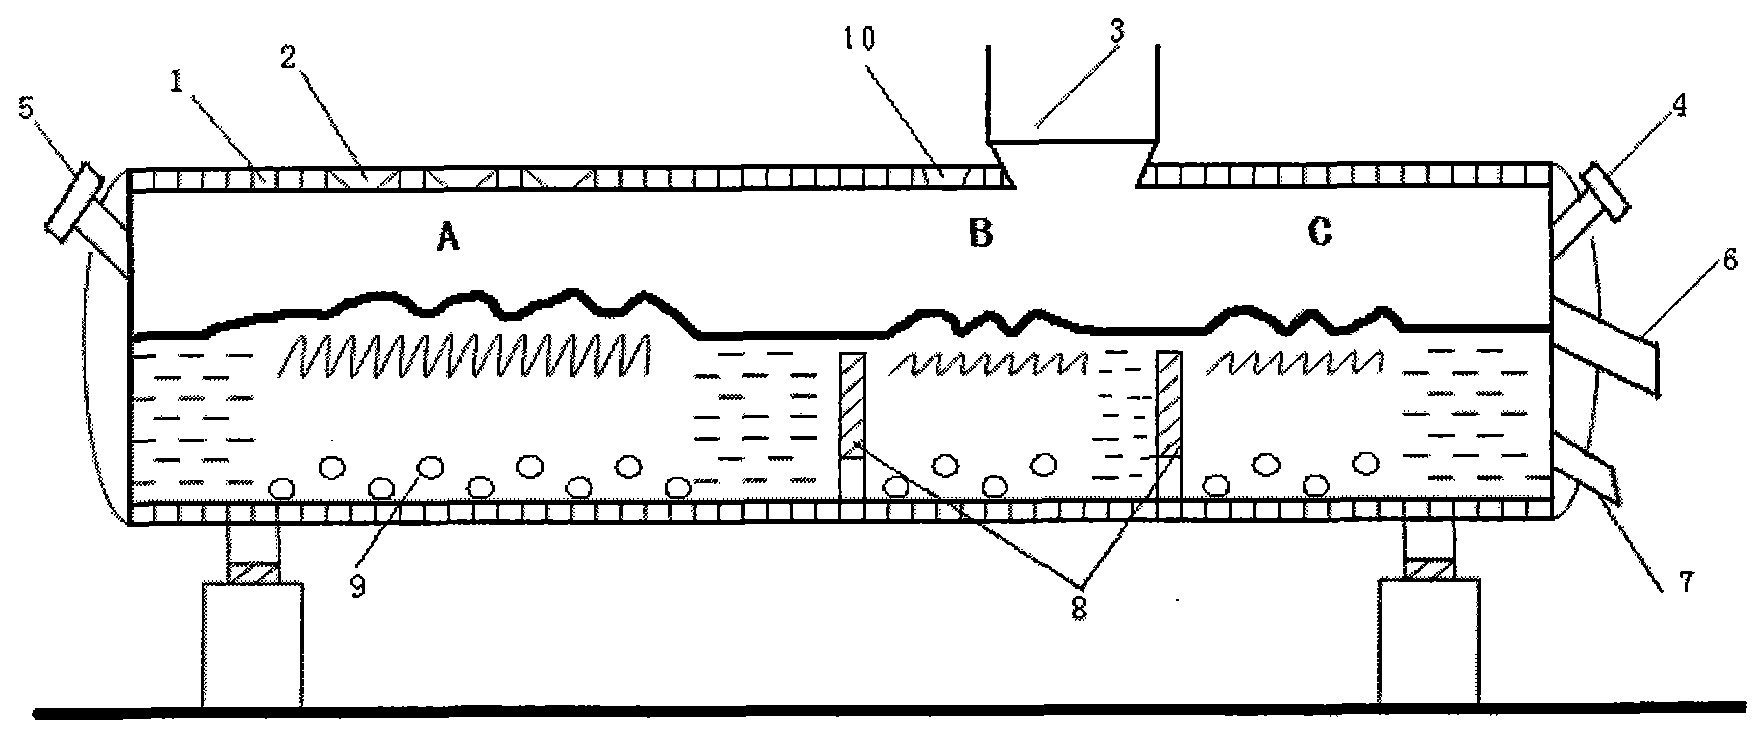 Copper smelting device and process